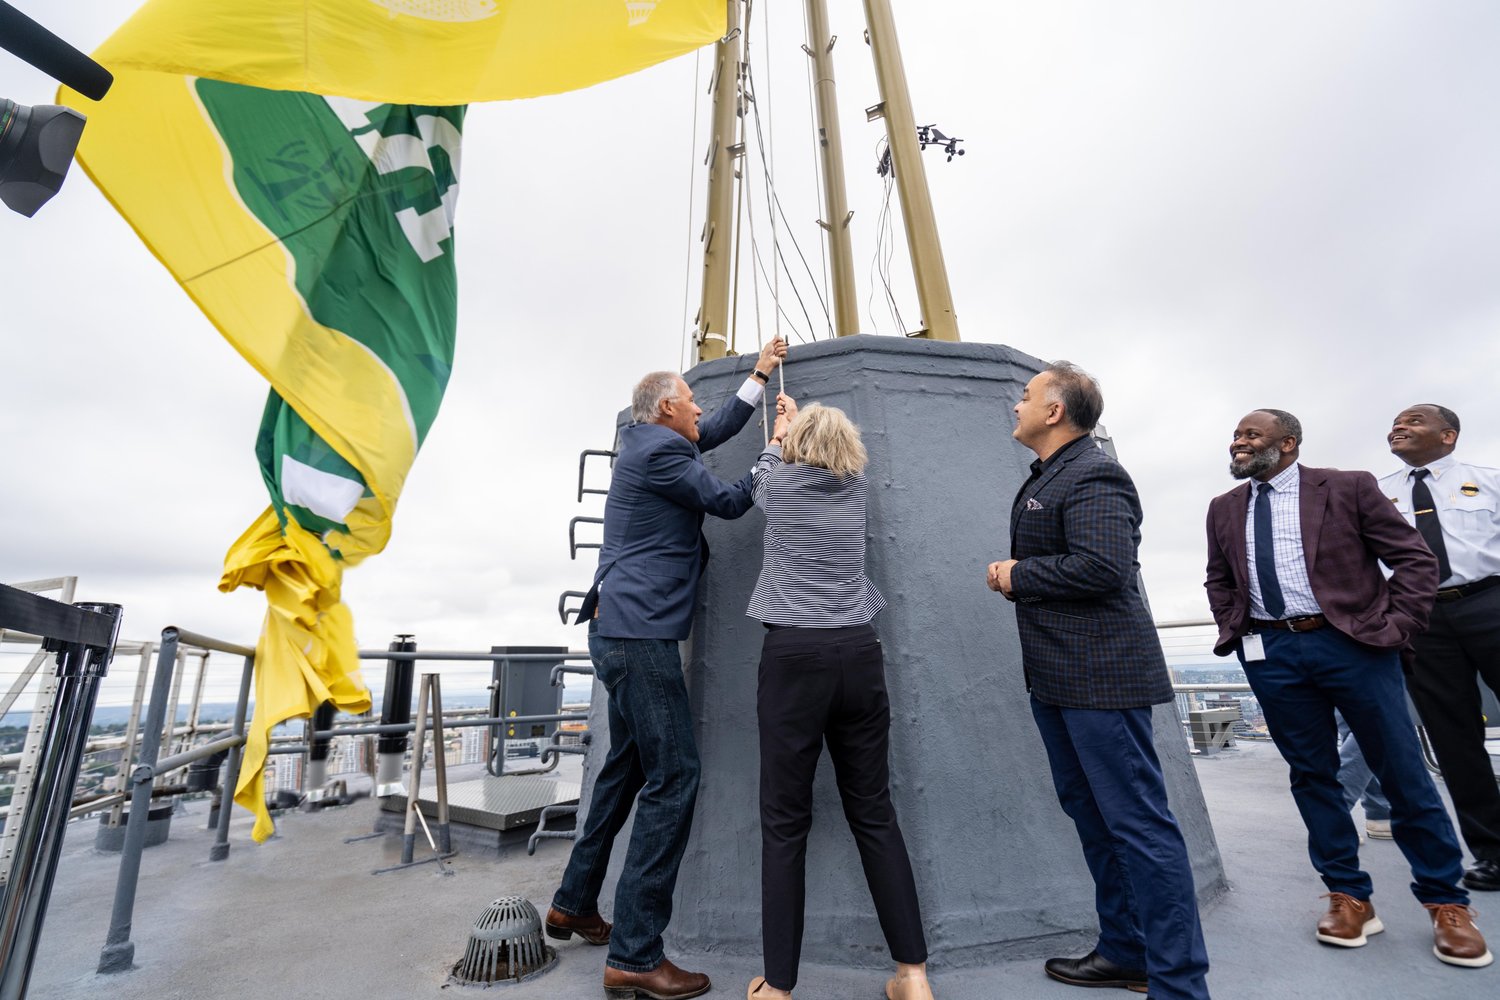 Gov. Jay Inslee celebrated Washington state's reopening on Thursday in typical Seattle fashion: on the roof of the Space Needle under a cloudy morning sky.